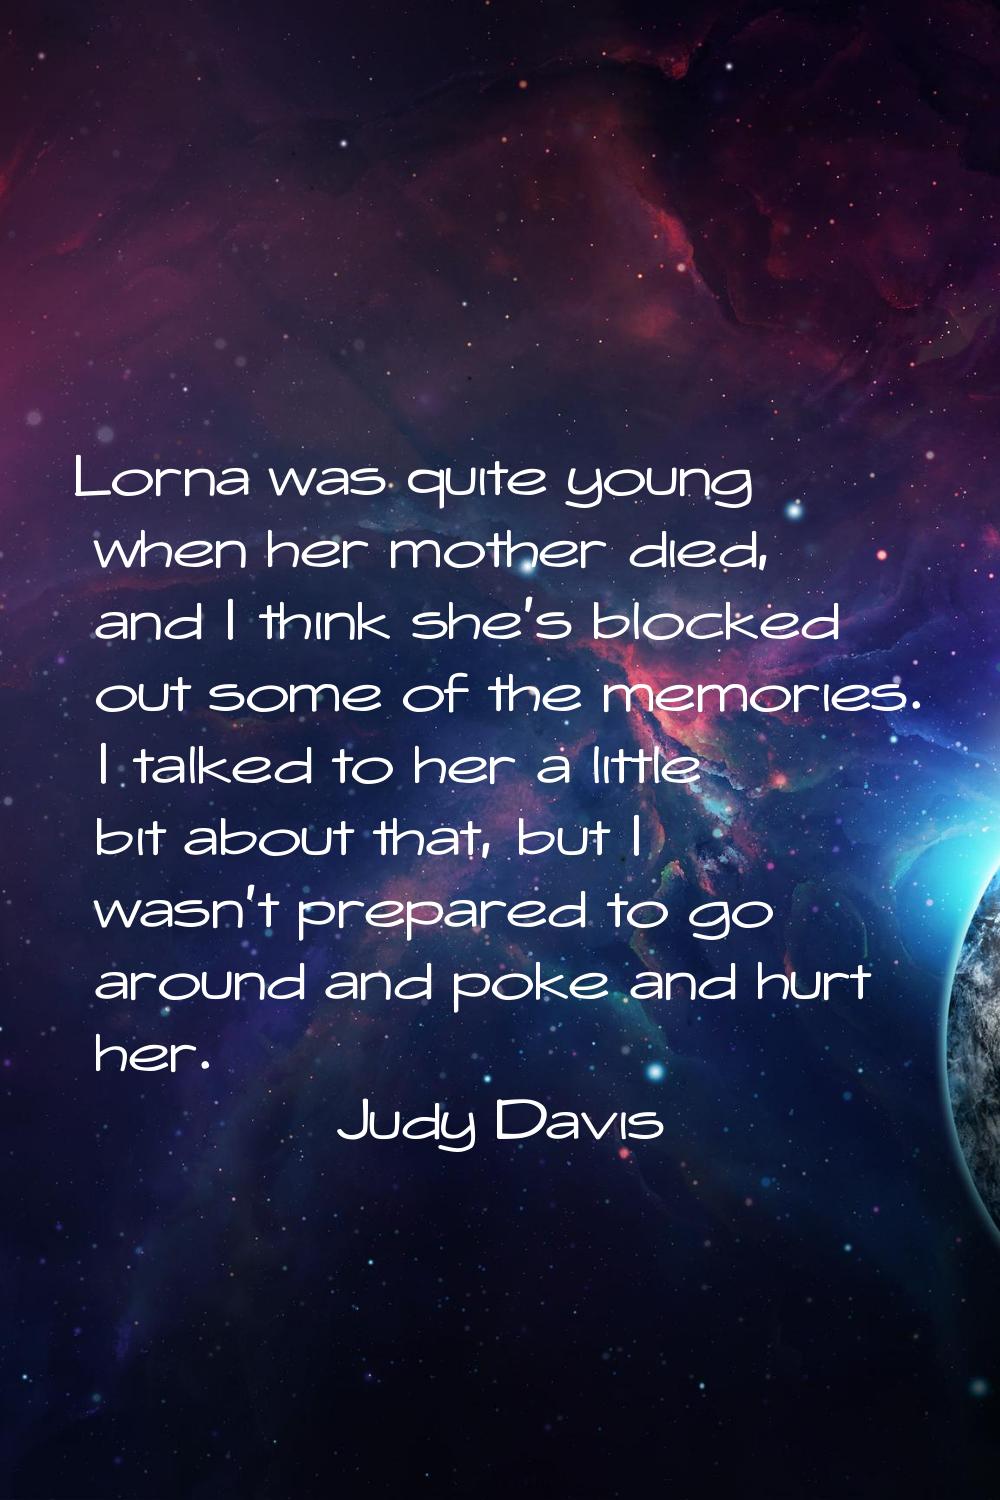 Lorna was quite young when her mother died, and I think she's blocked out some of the memories. I t